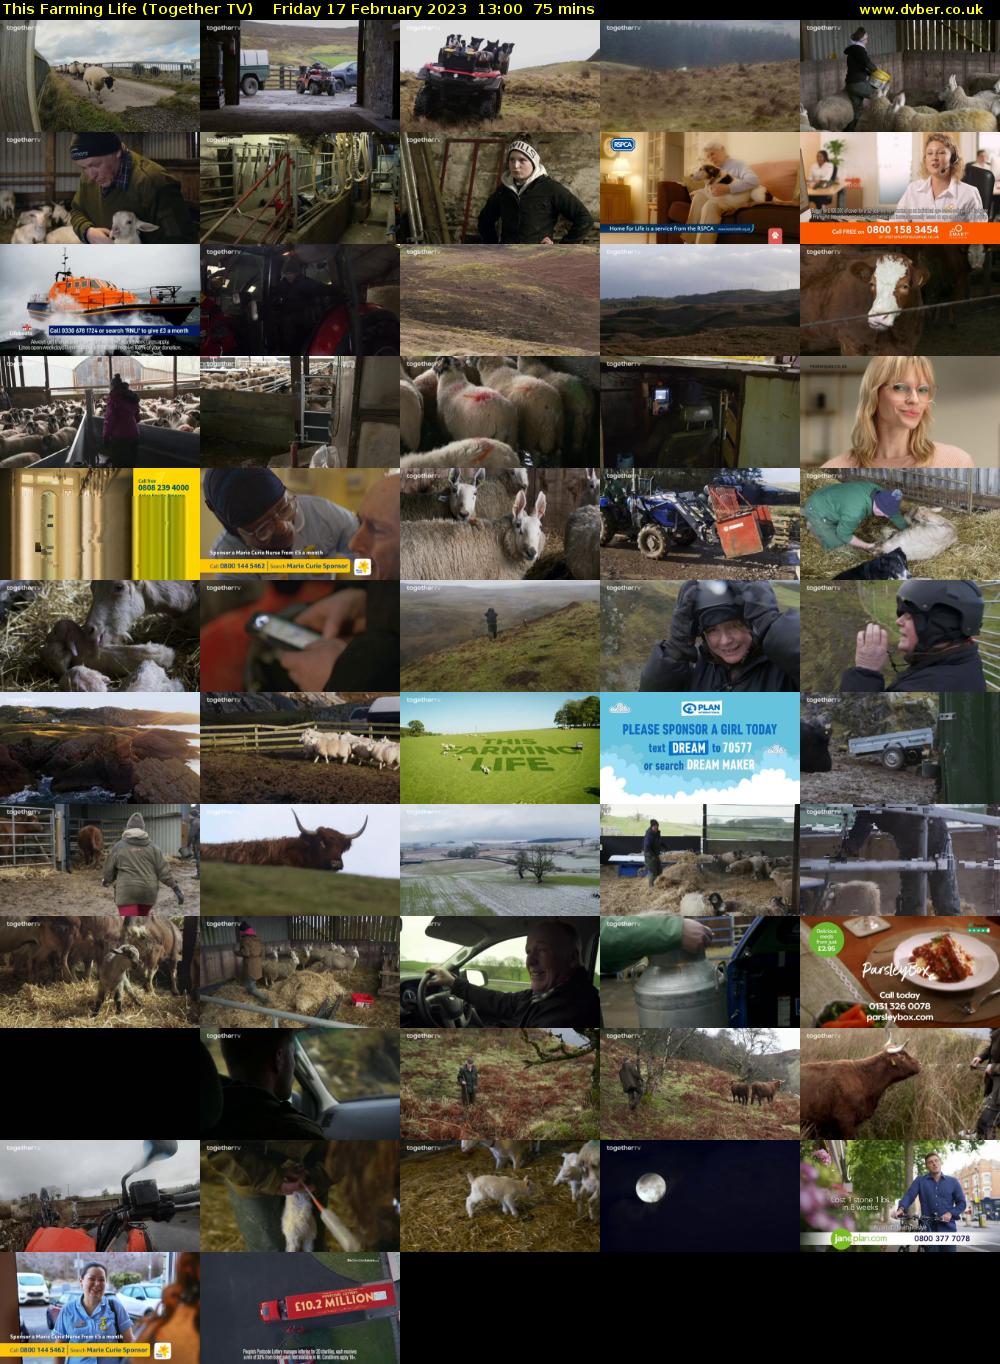 This Farming Life (Together TV) Friday 17 February 2023 13:00 - 14:15